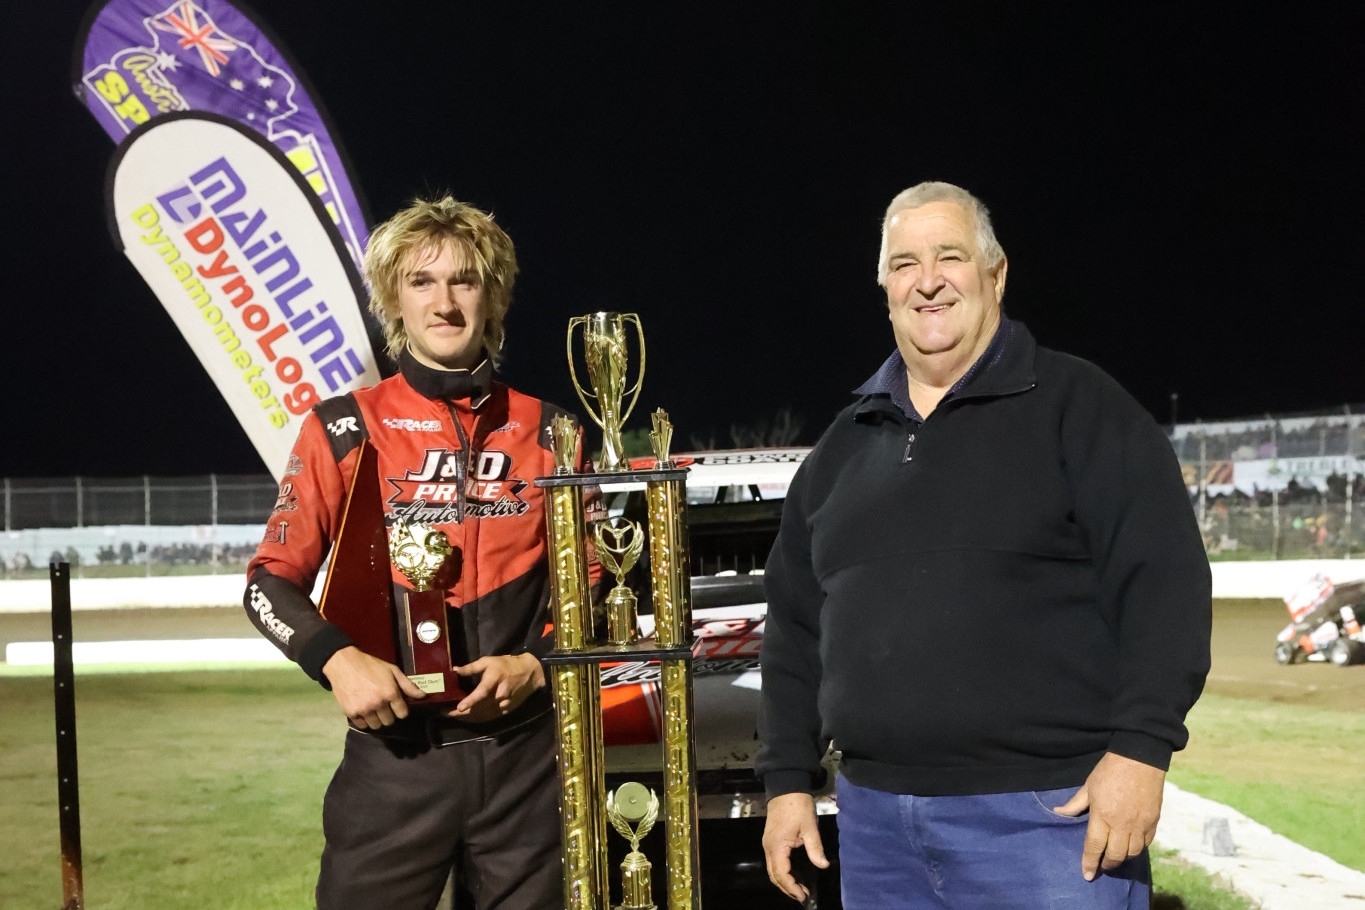 Jacob Pitcher winner of the Super Rods annual ‘Snoopy’s Slam’ with John ‘Snoopy’ Verhoeven.